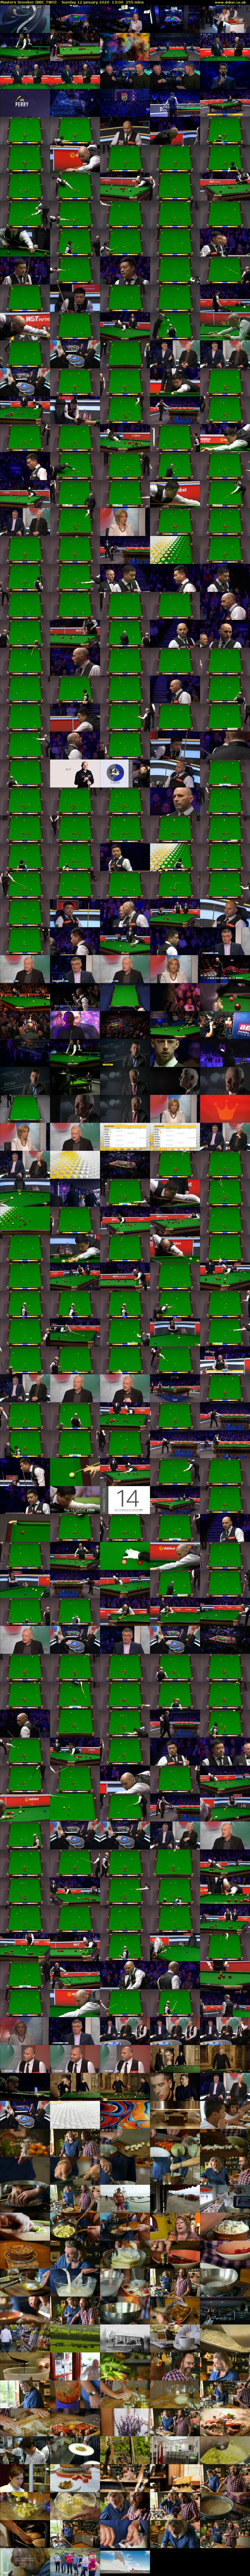 Masters Snooker (BBC TWO) Sunday 12 January 2020 13:00 - 17:15